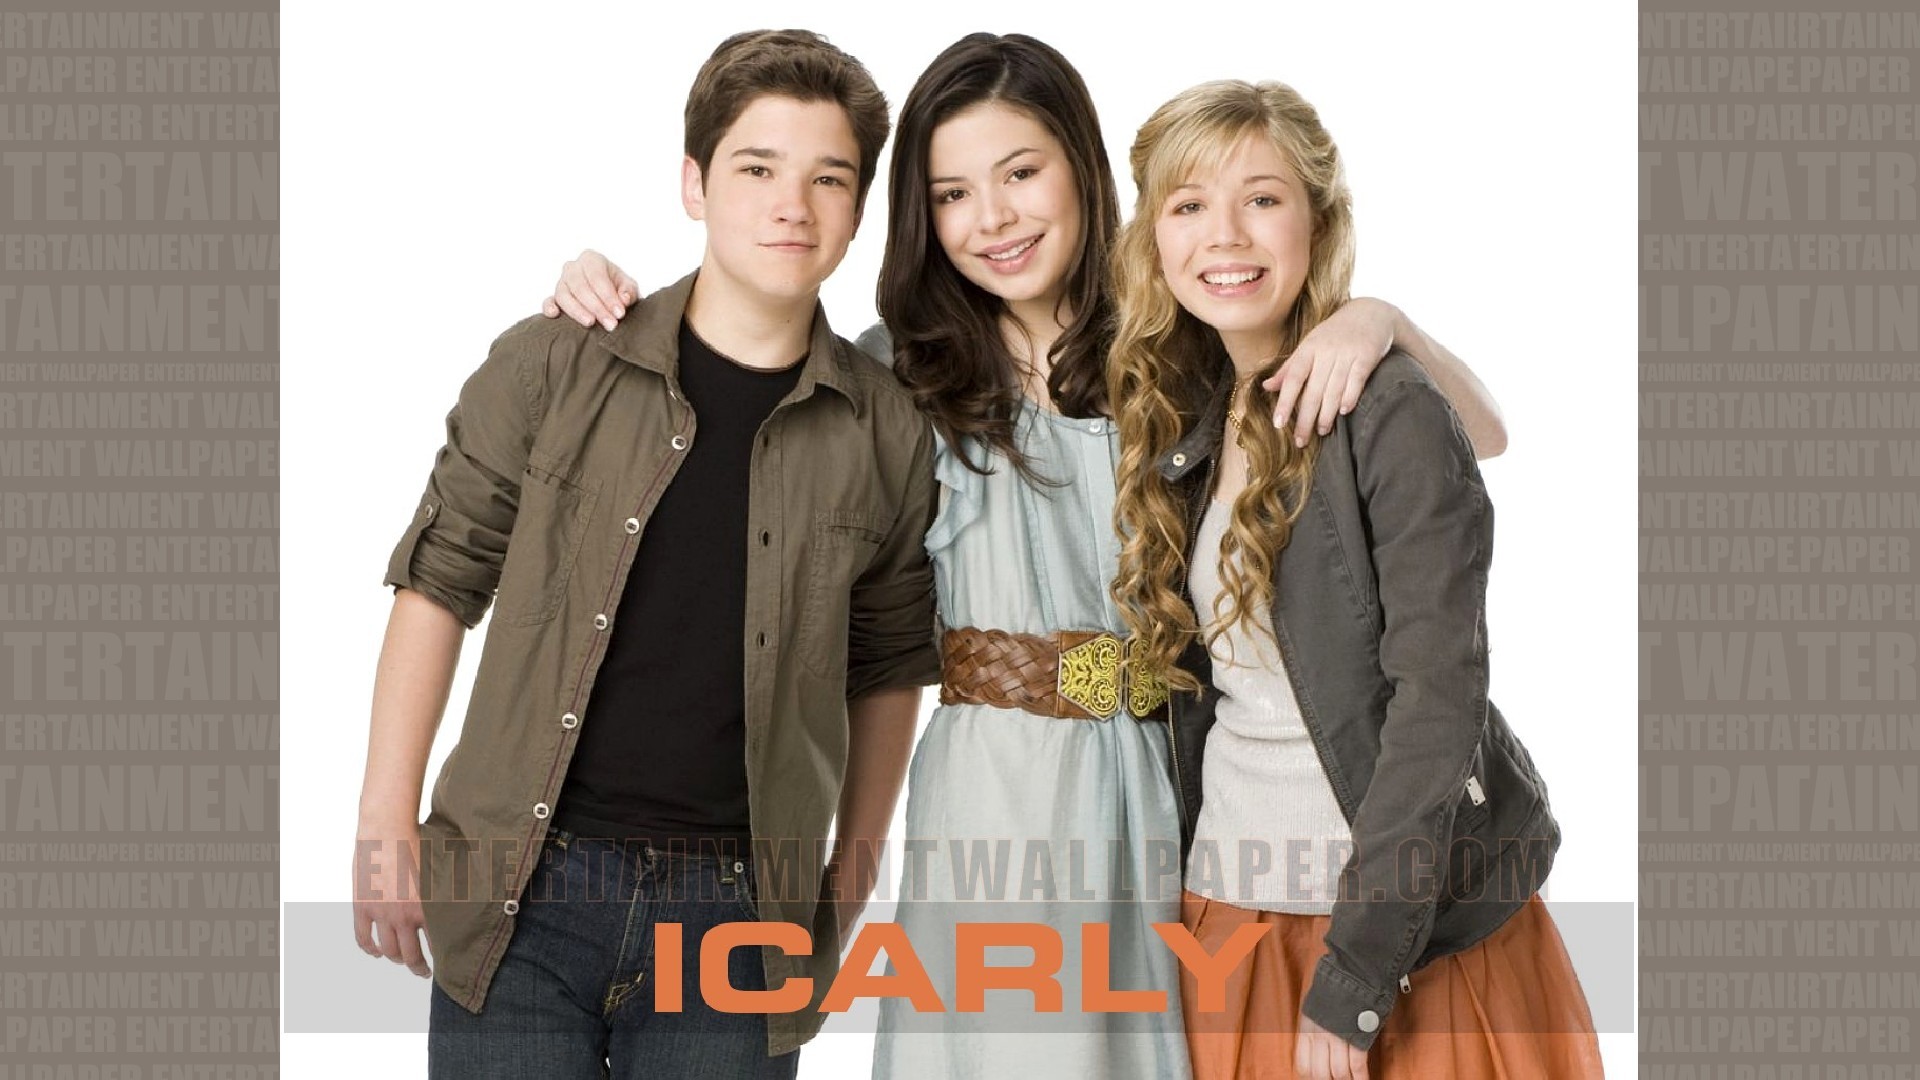 1920x1080 iCarly Wallpaper - Original size, download now.